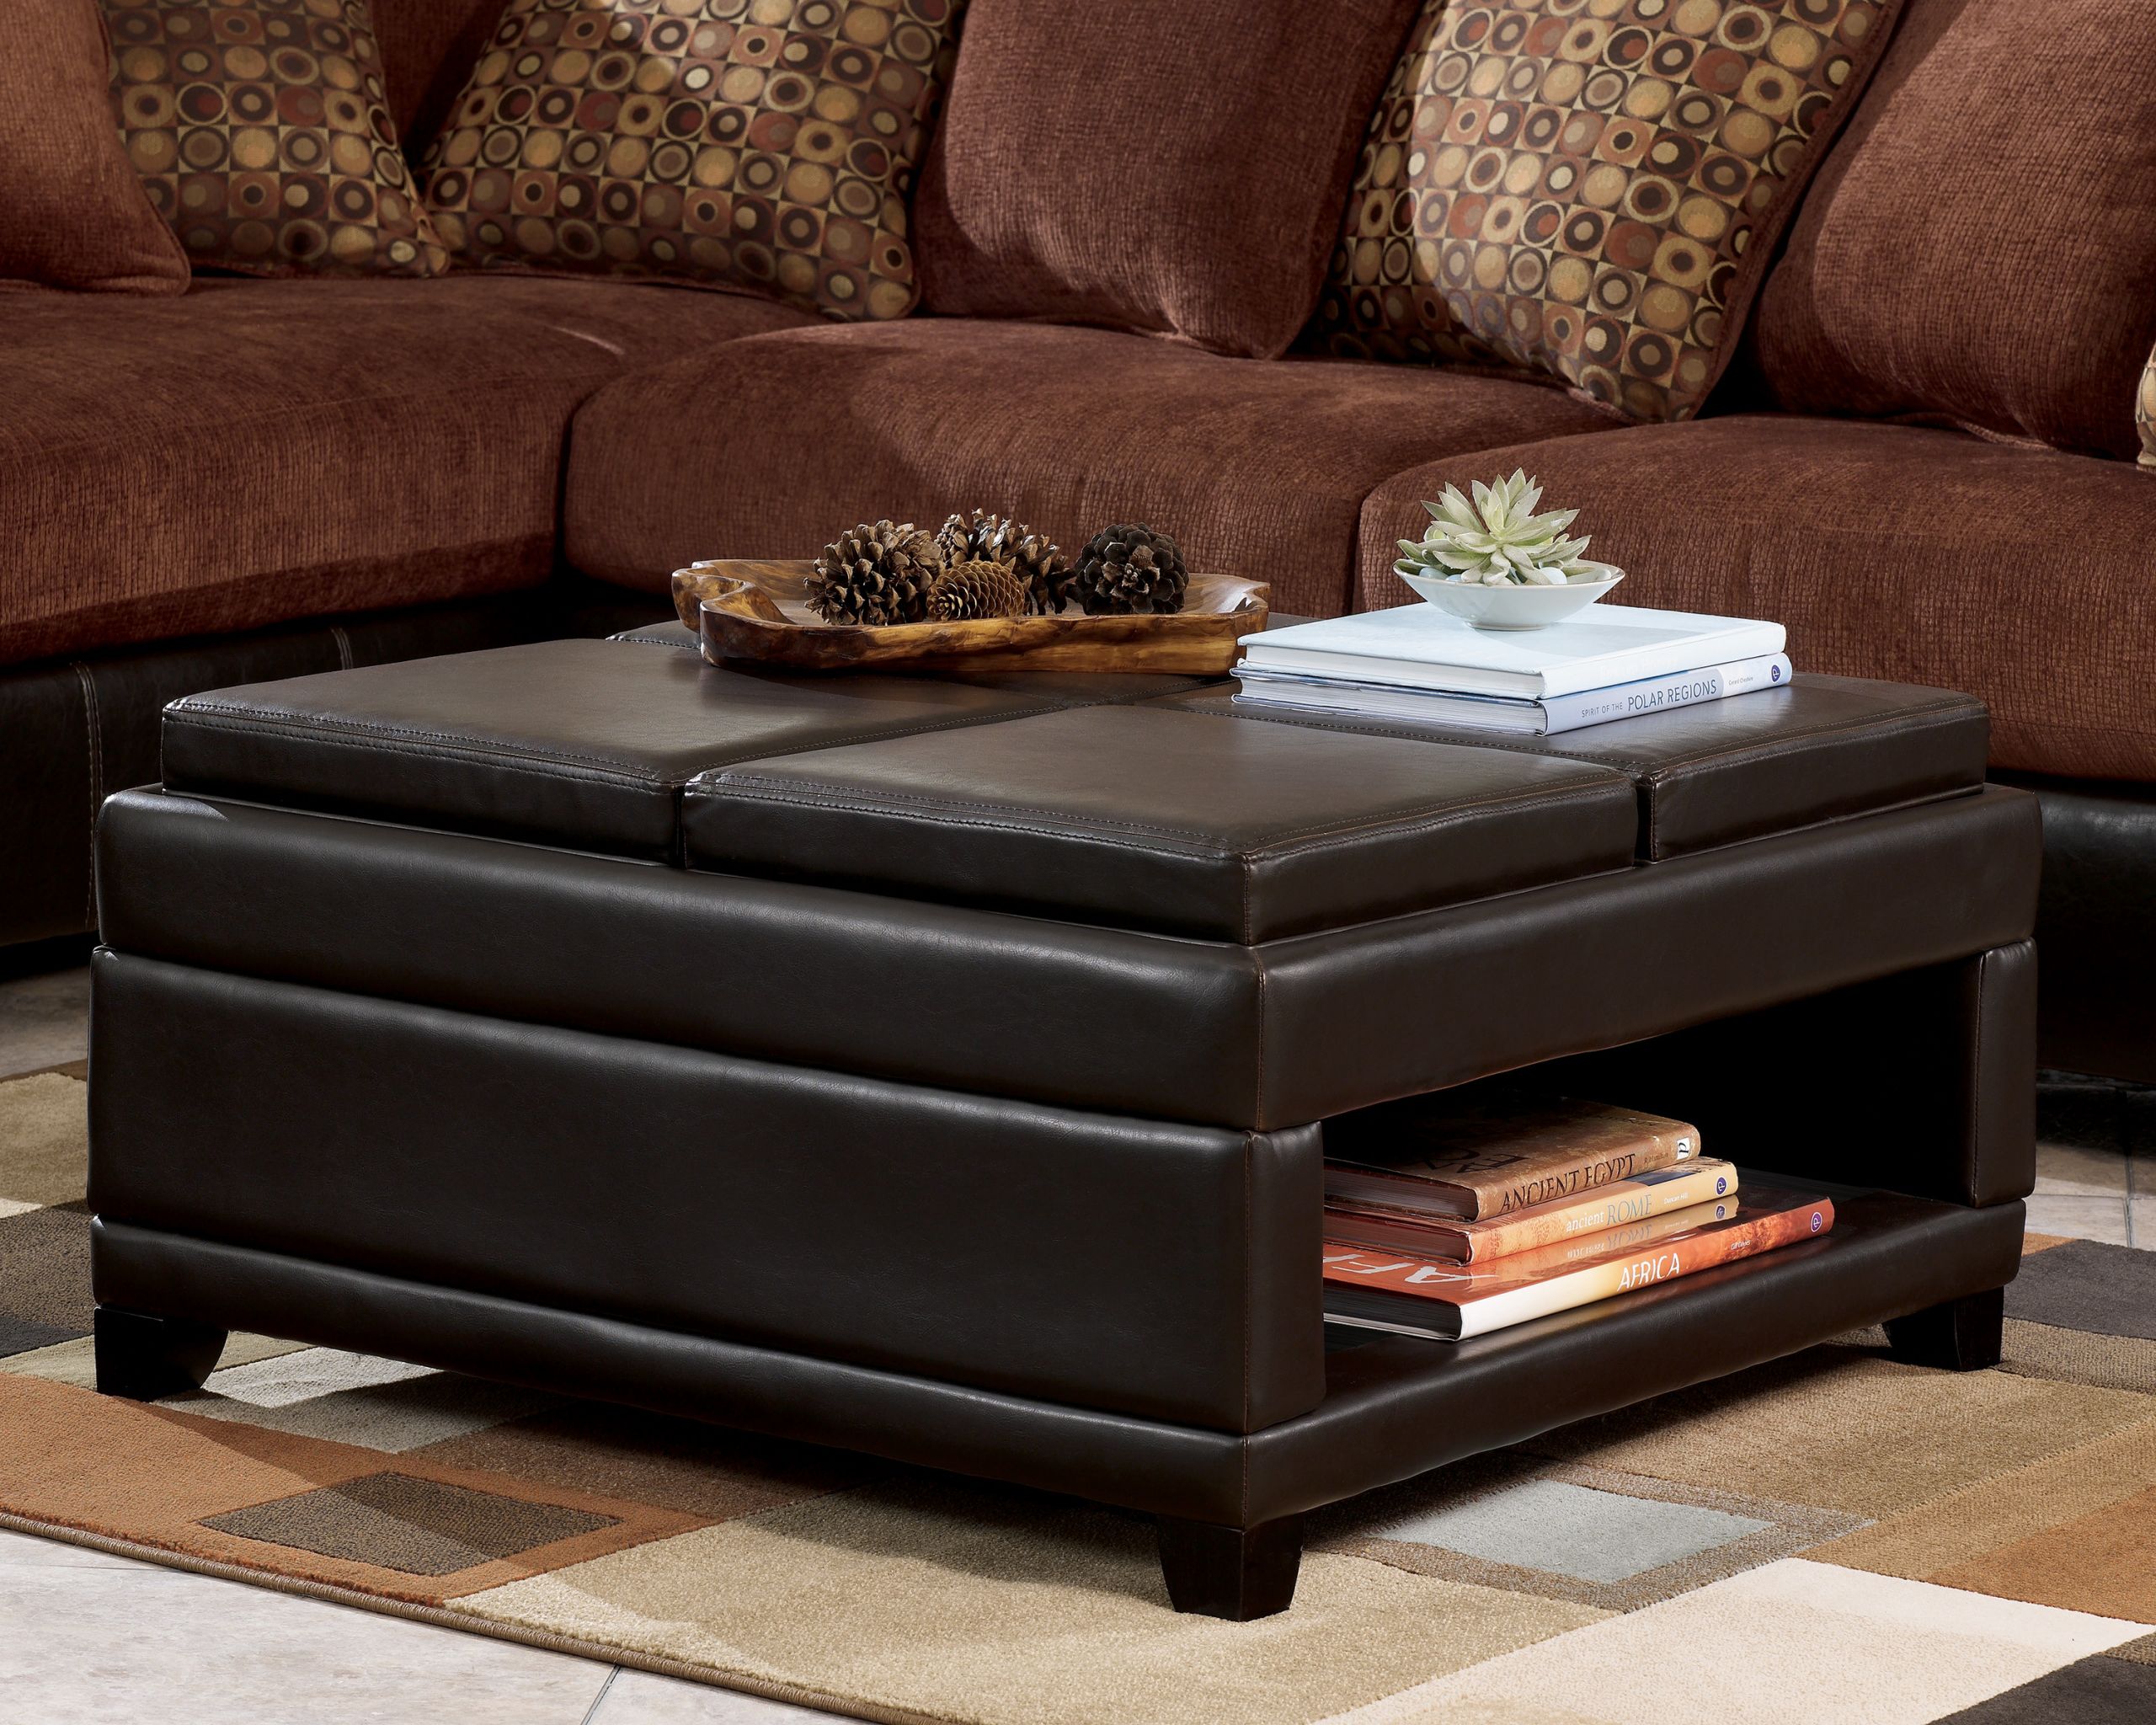 Living Room Ottoman Coffee Table
 Good Softy Coffee Table Ottoman With Amazing Design For